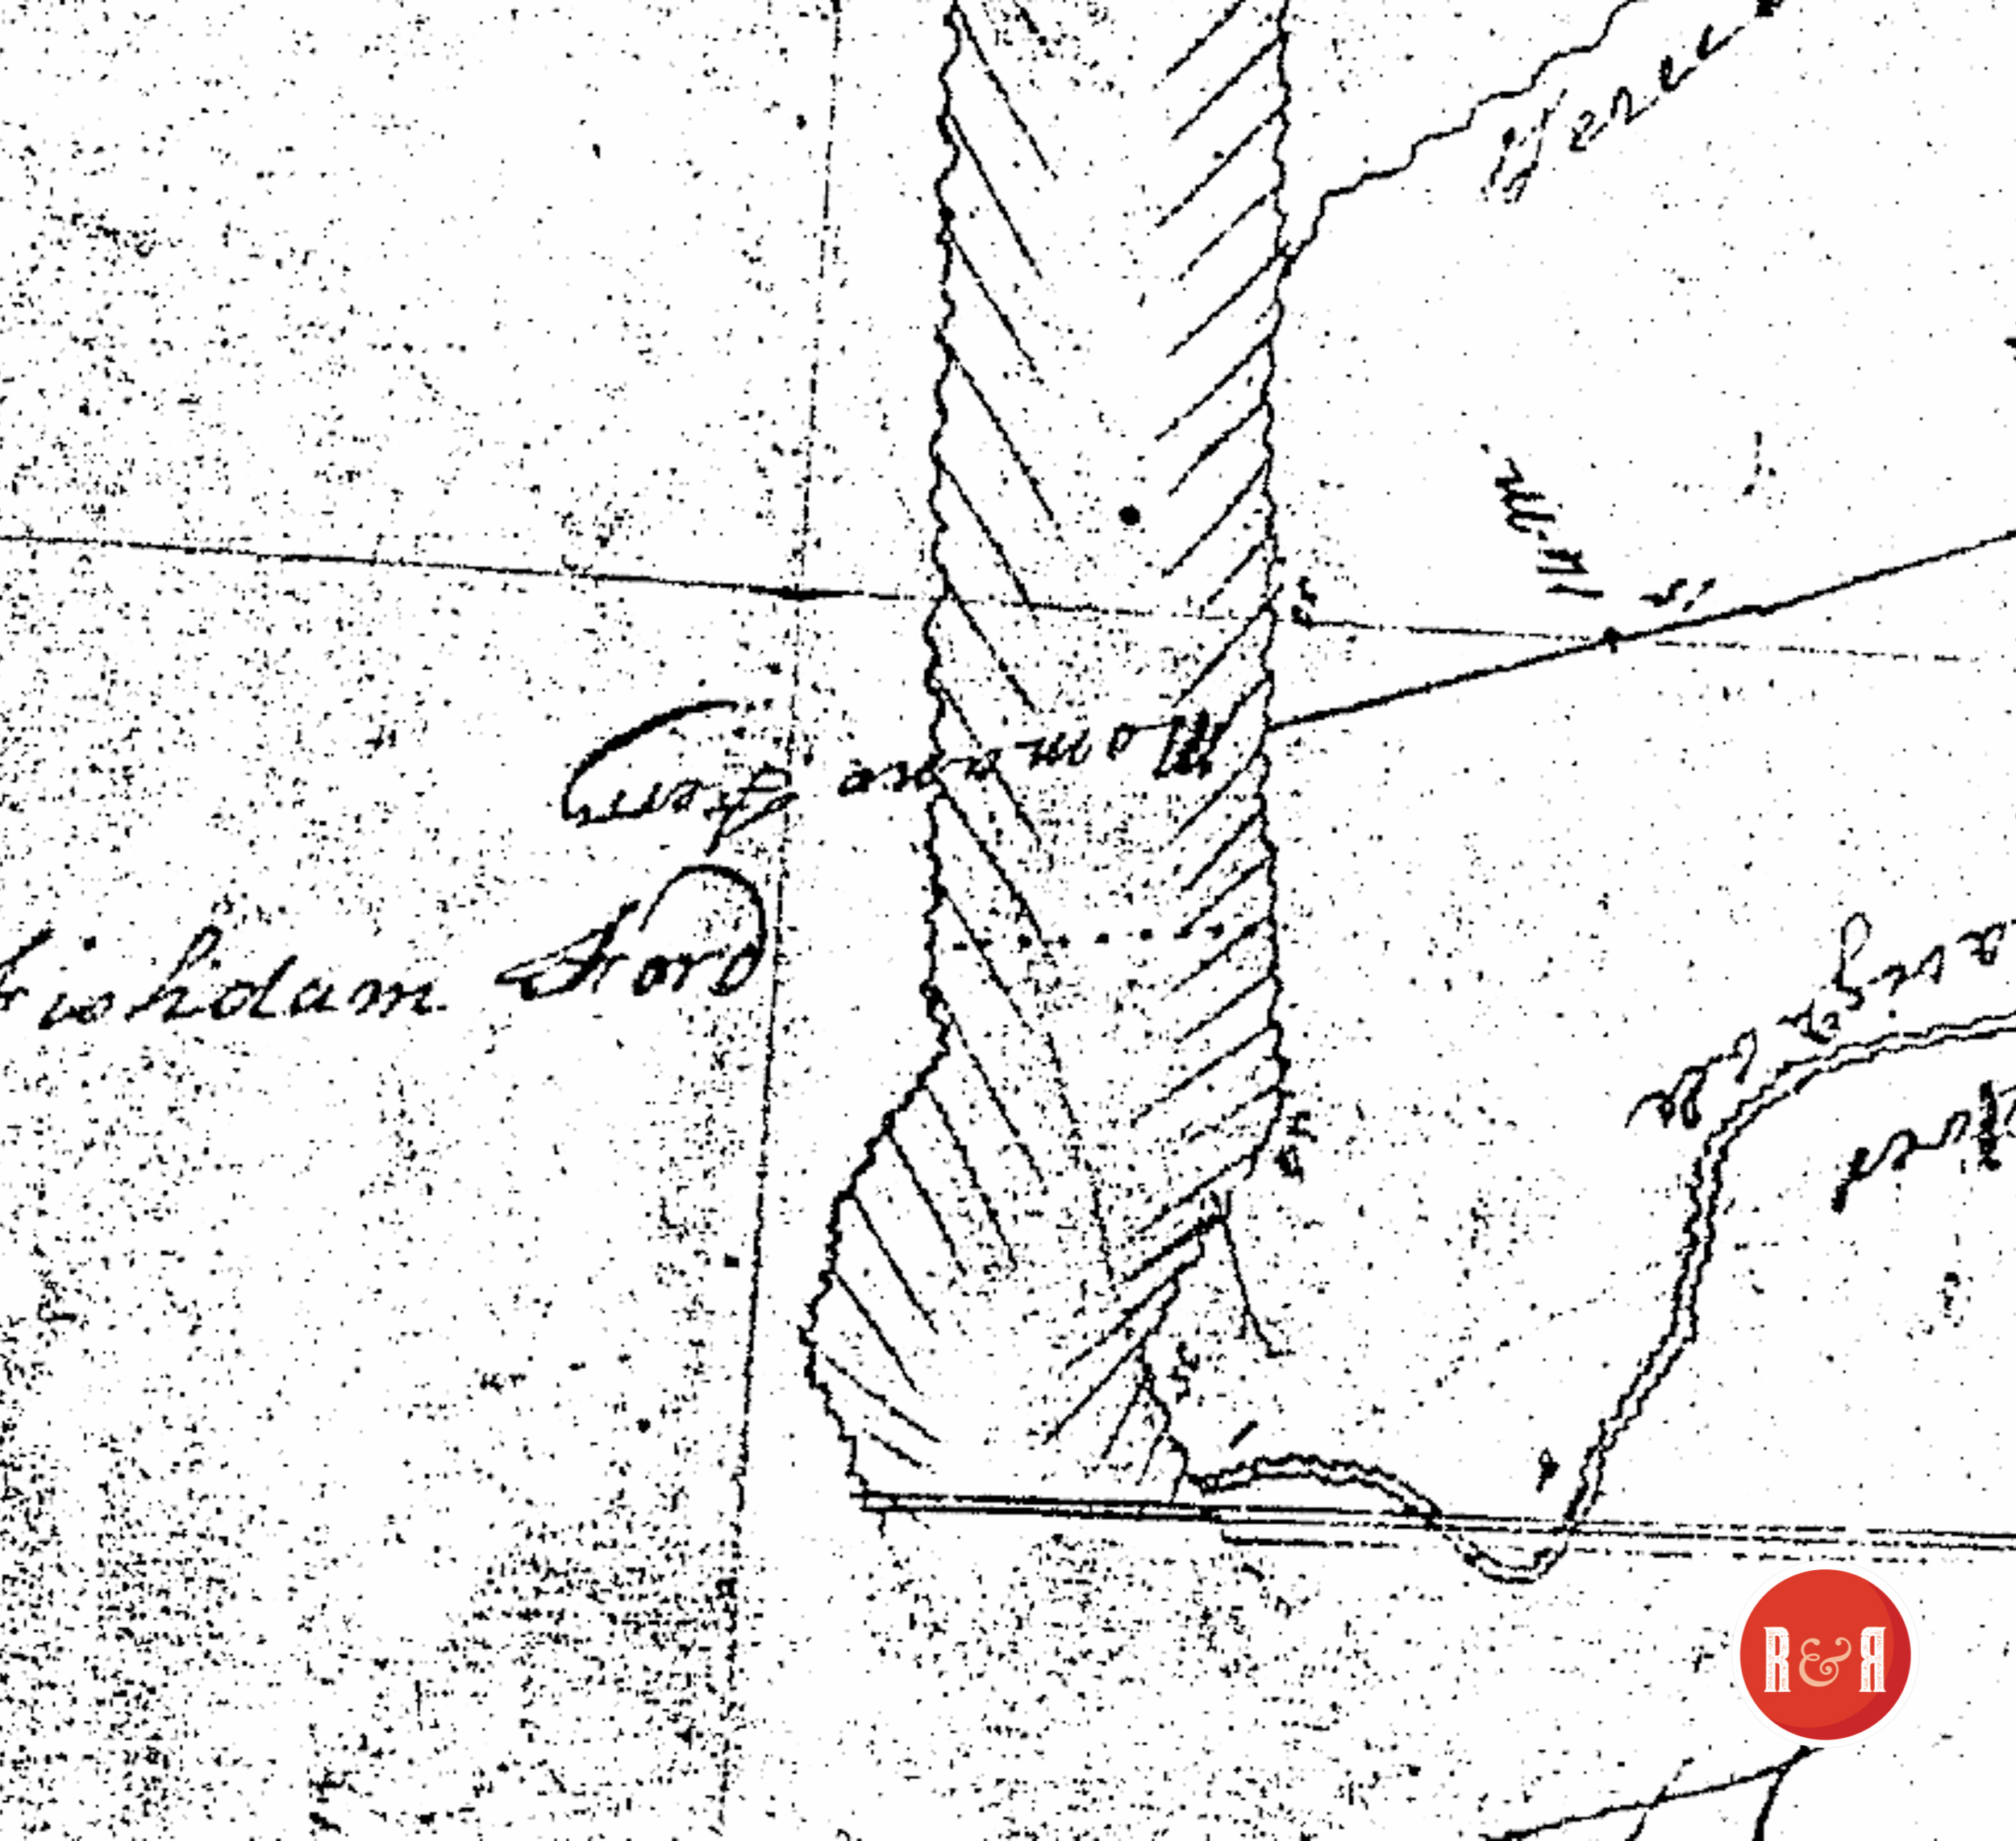 BOYD'S 1818 MAP SHOWING THE LOCATION OF FISHDAM